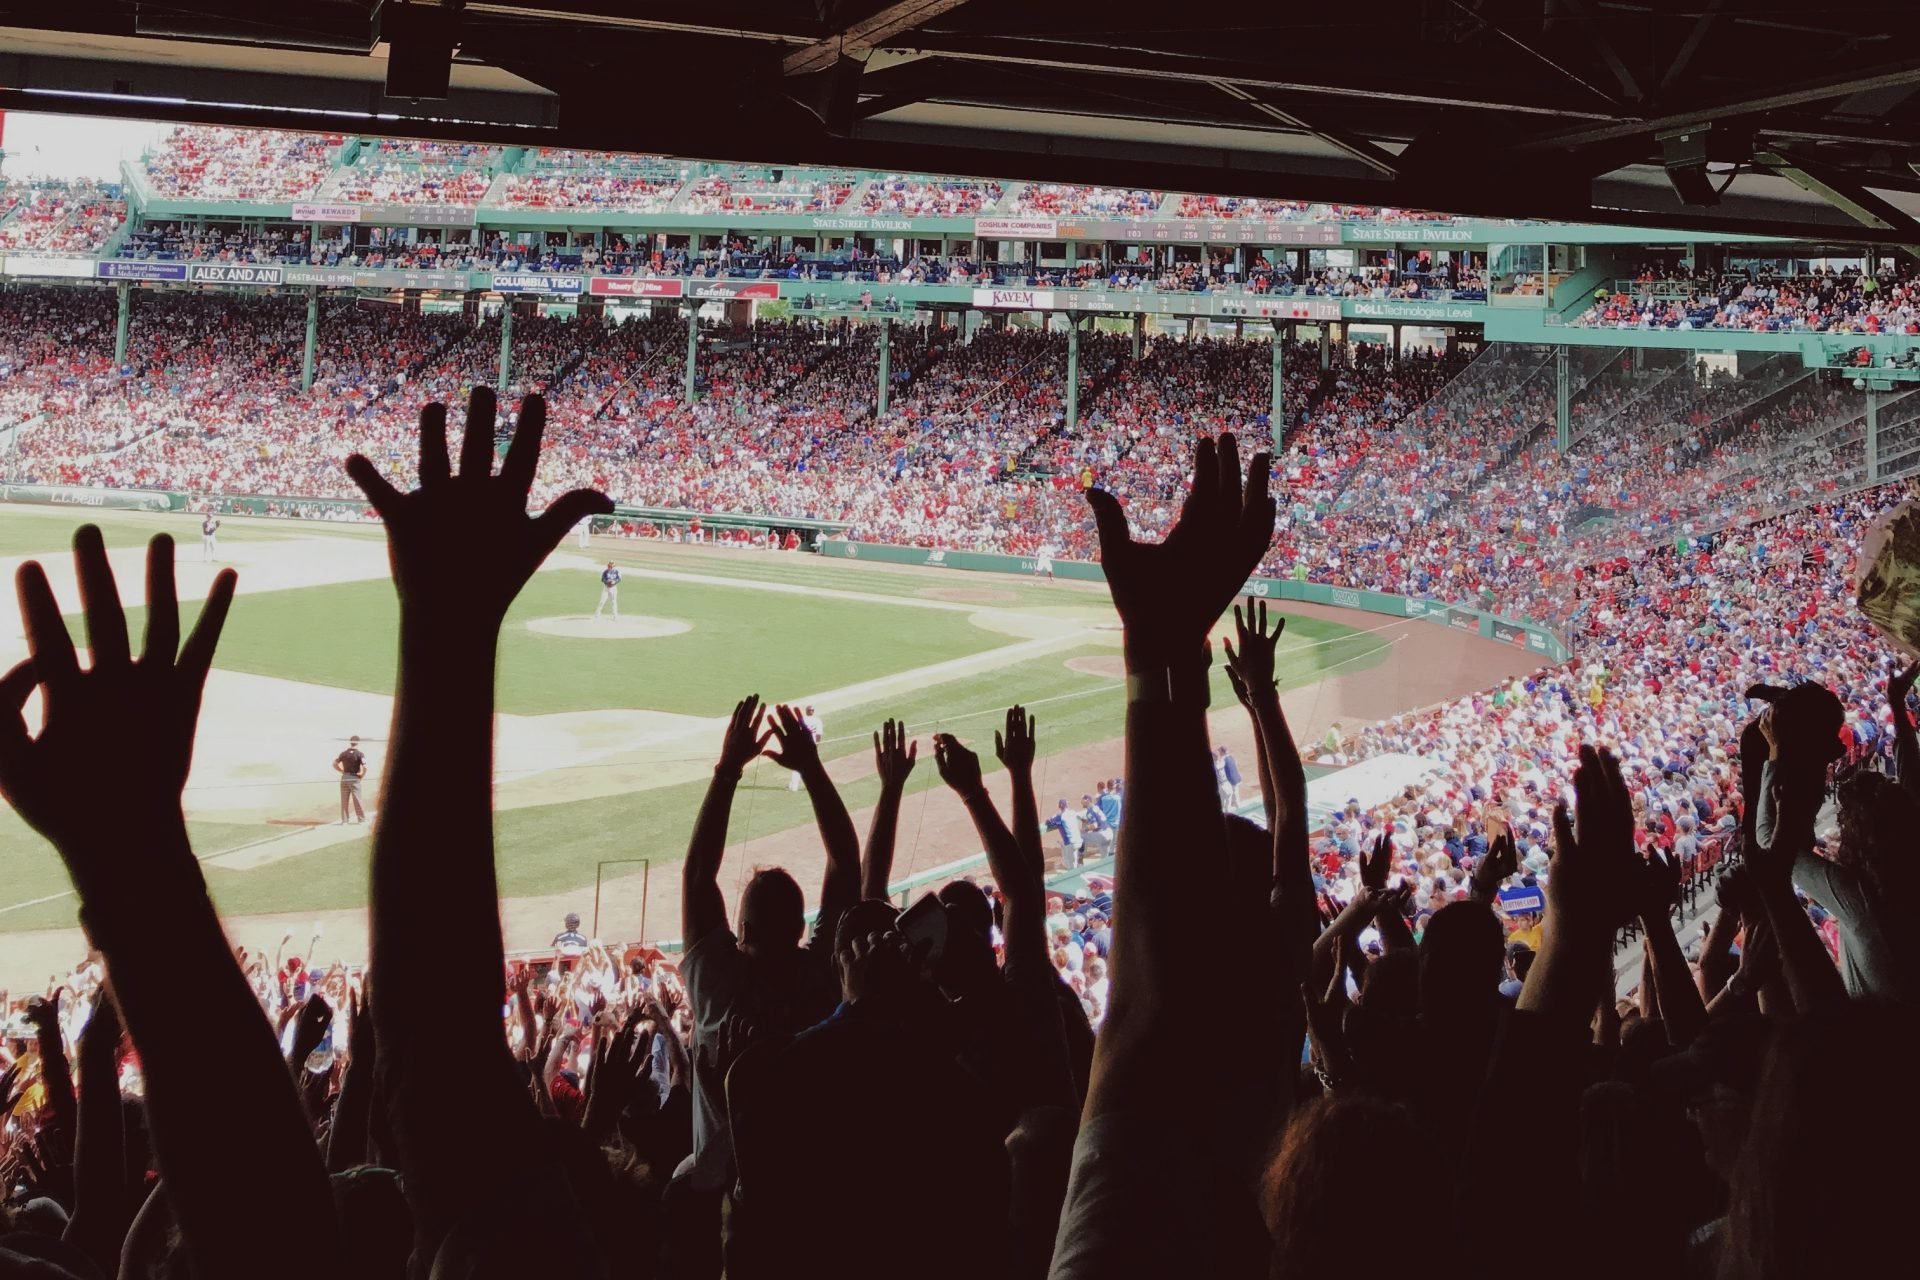 Here are 11 reasons why it is worth going to a Sox game